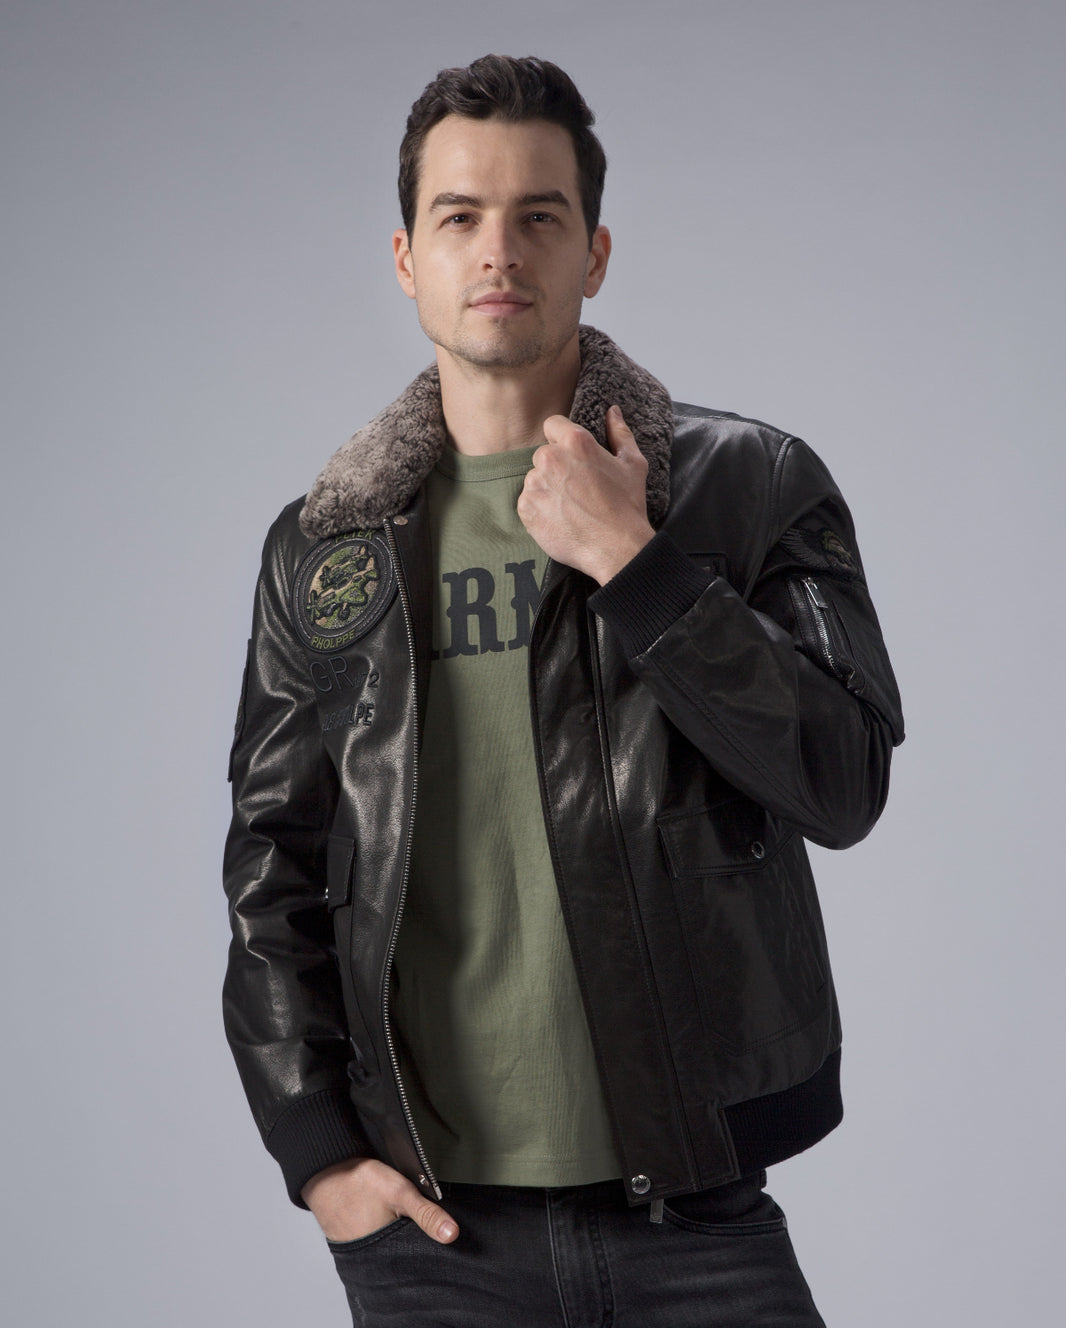 Air Force Leather Jackets - Flight Bomber Jackets for Men | PalaLeather